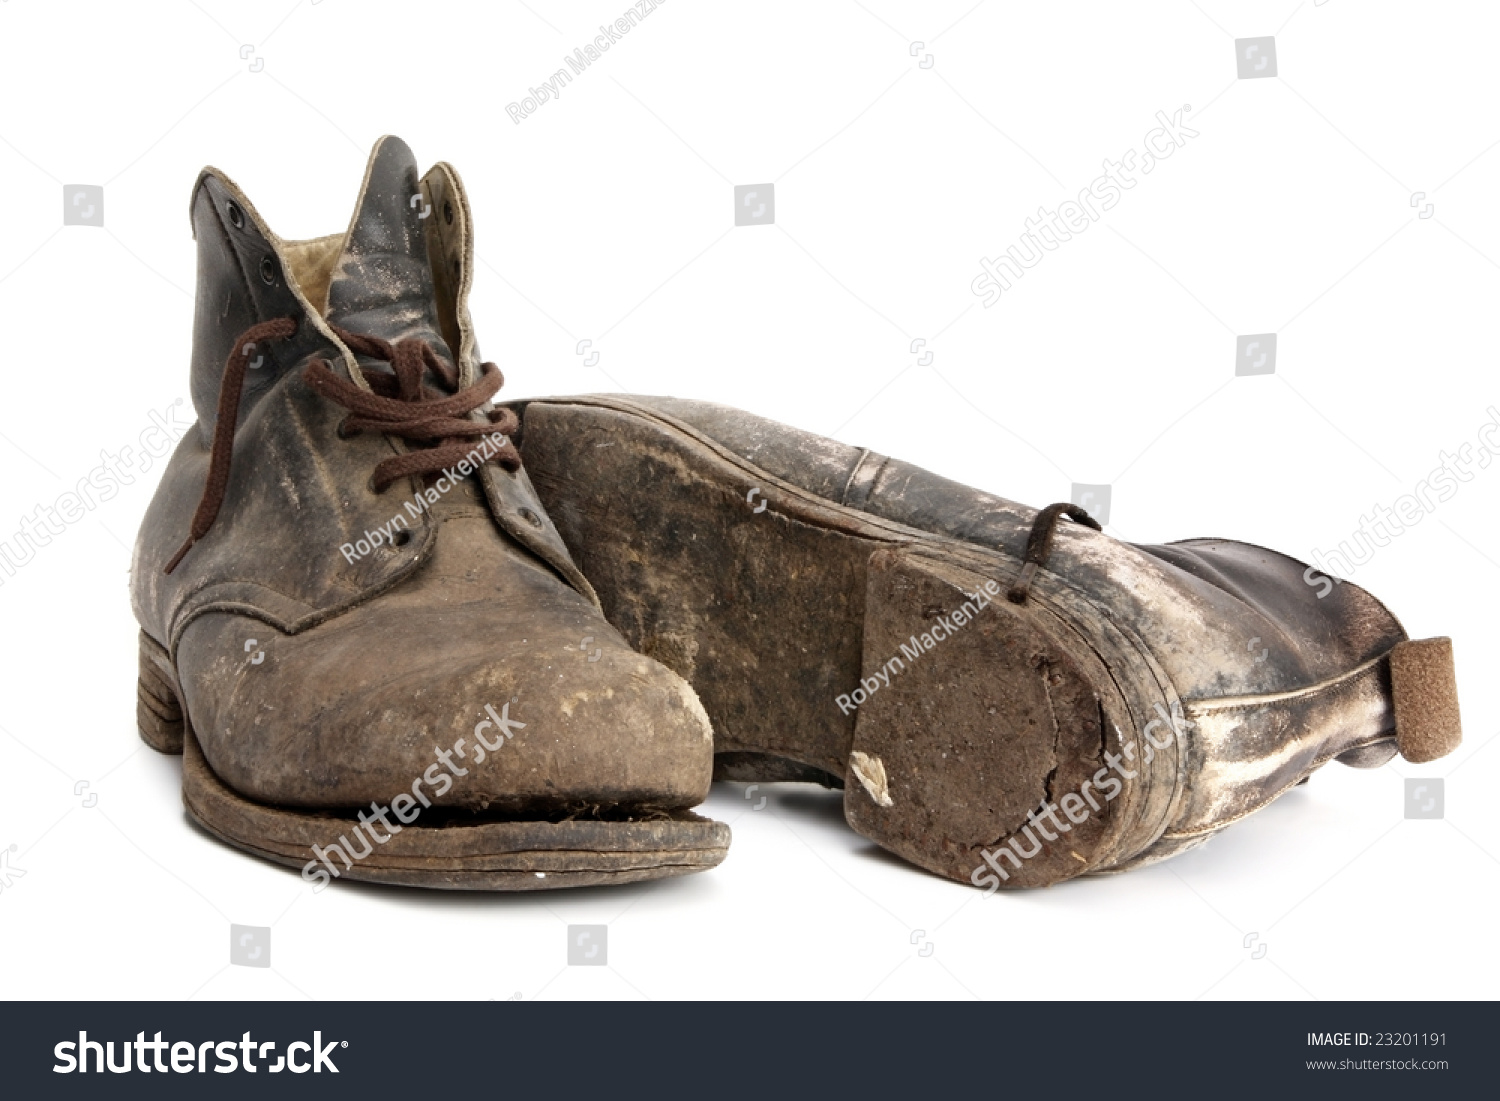 Wornout Old Work Boots Isolated On Stock Photo 23201191 - Shutterstock